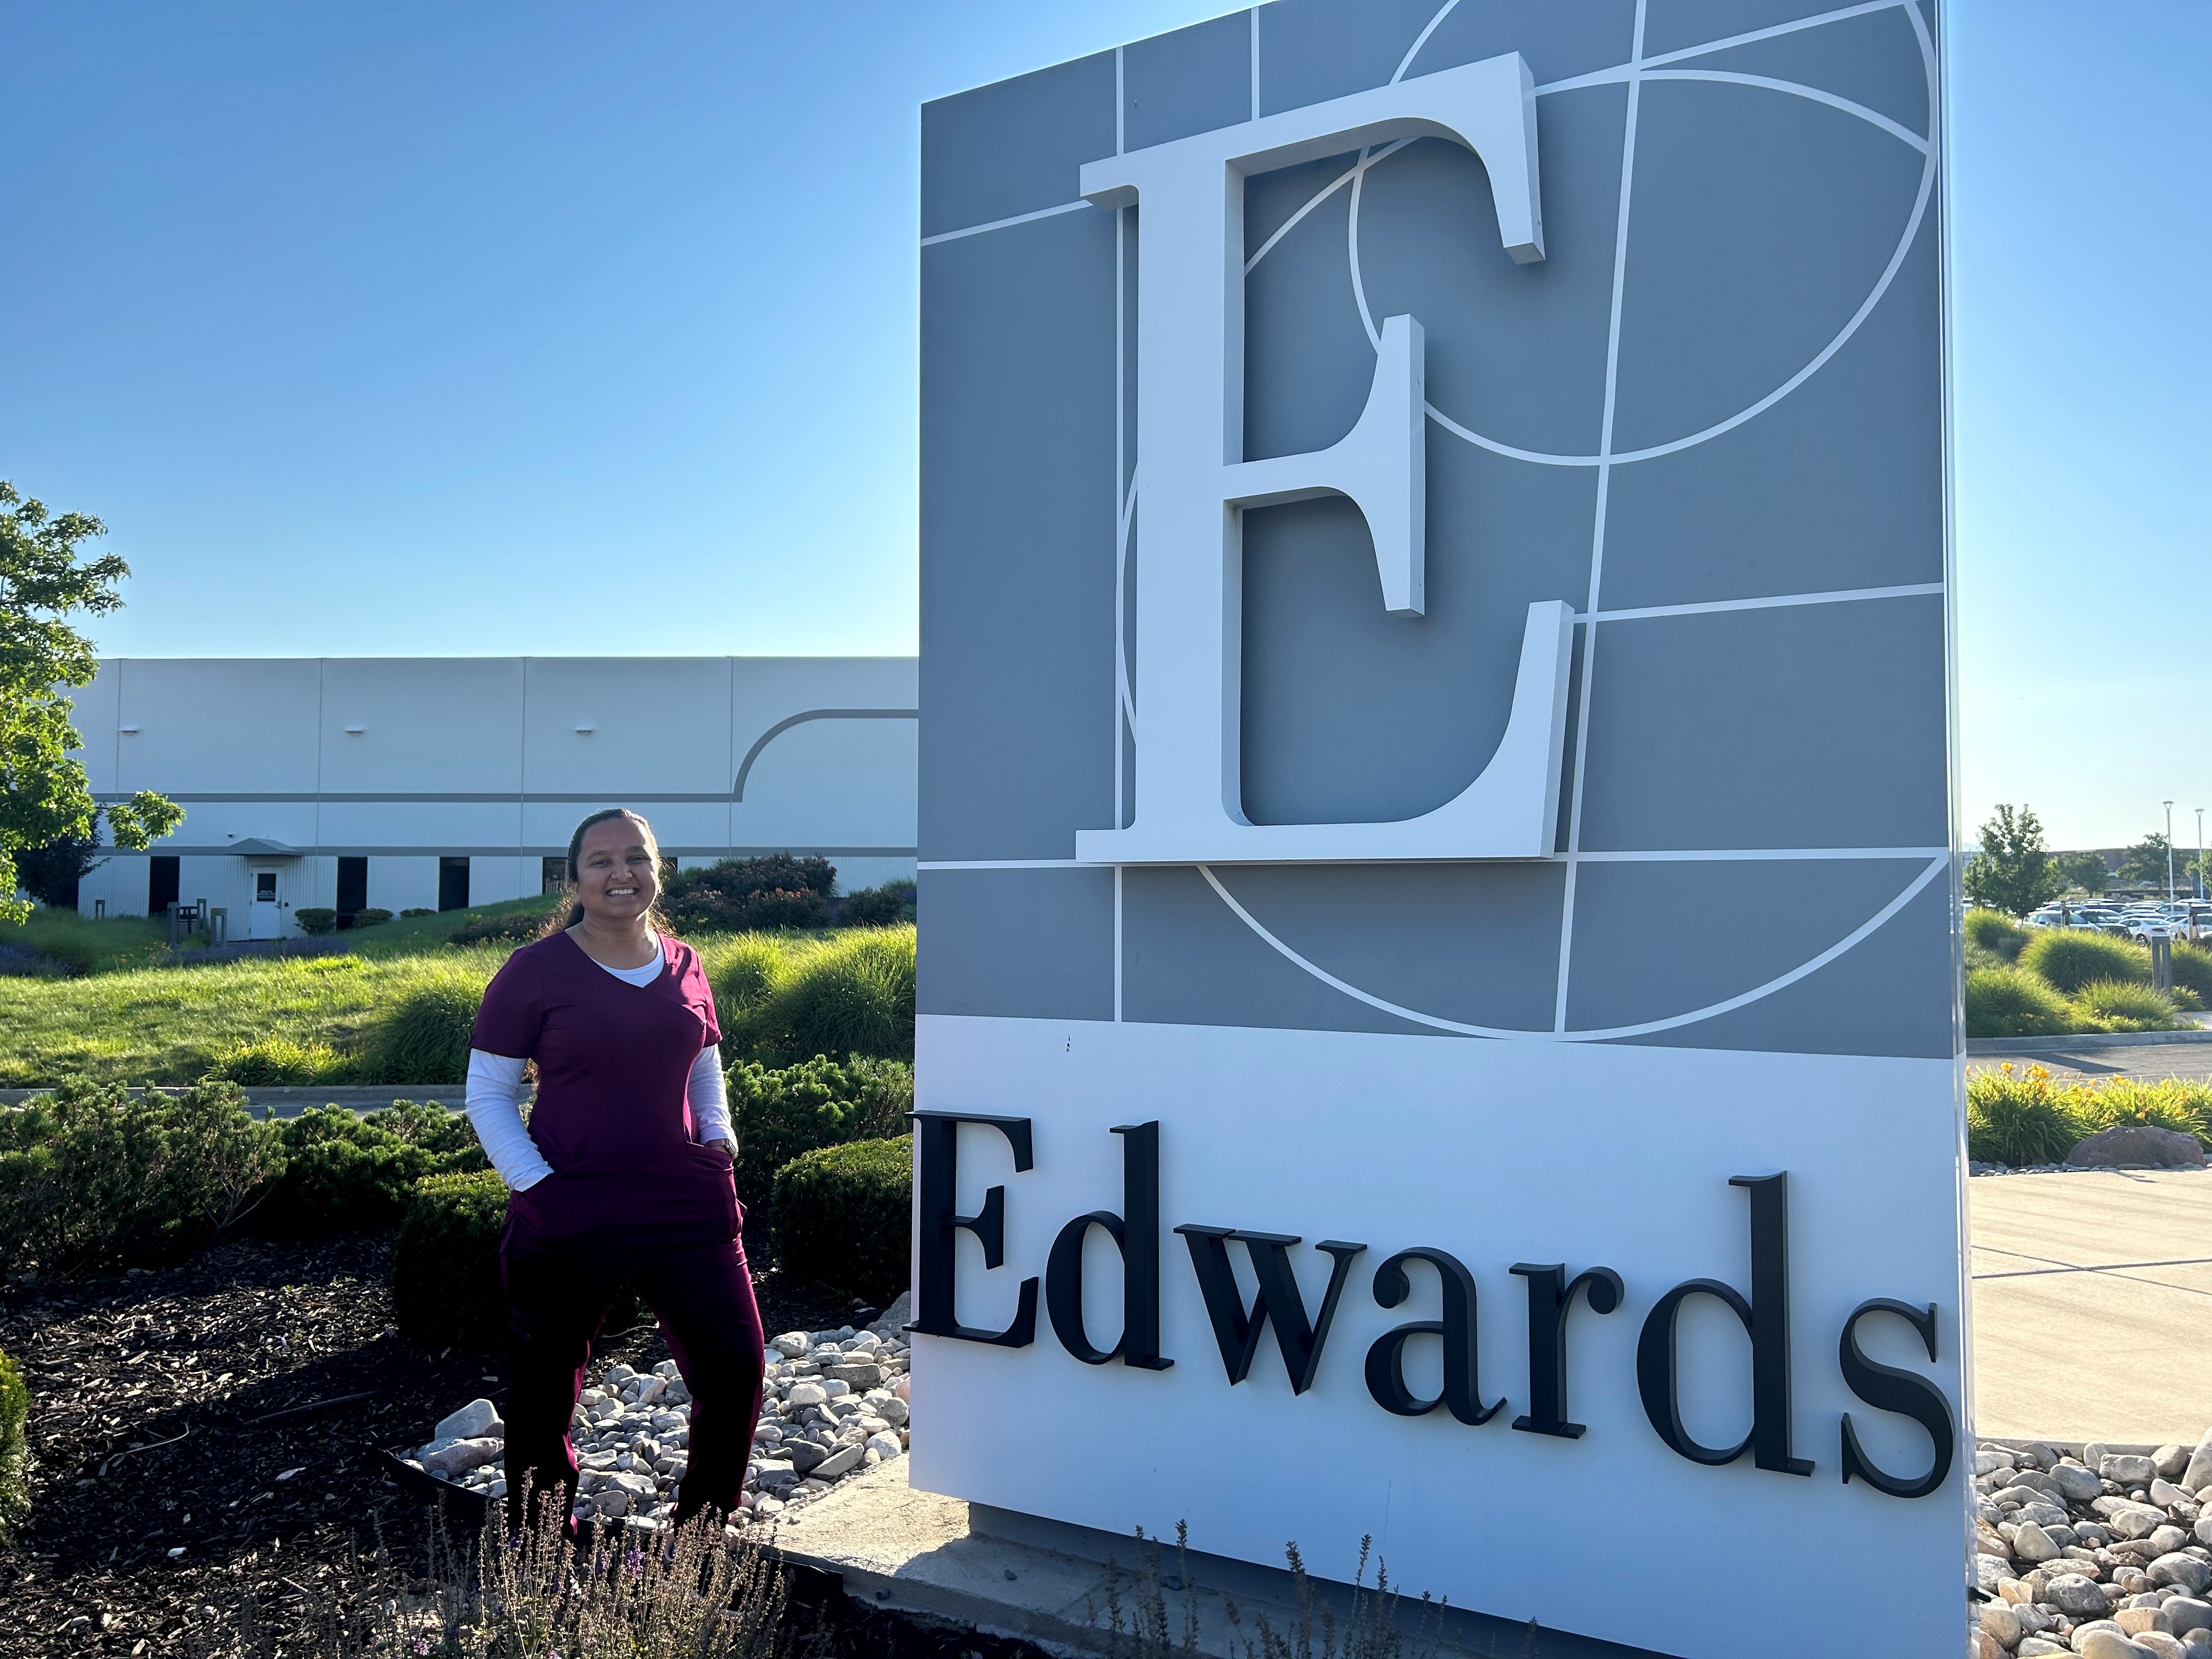 Shipra Rajput standing next to the Edwards sign